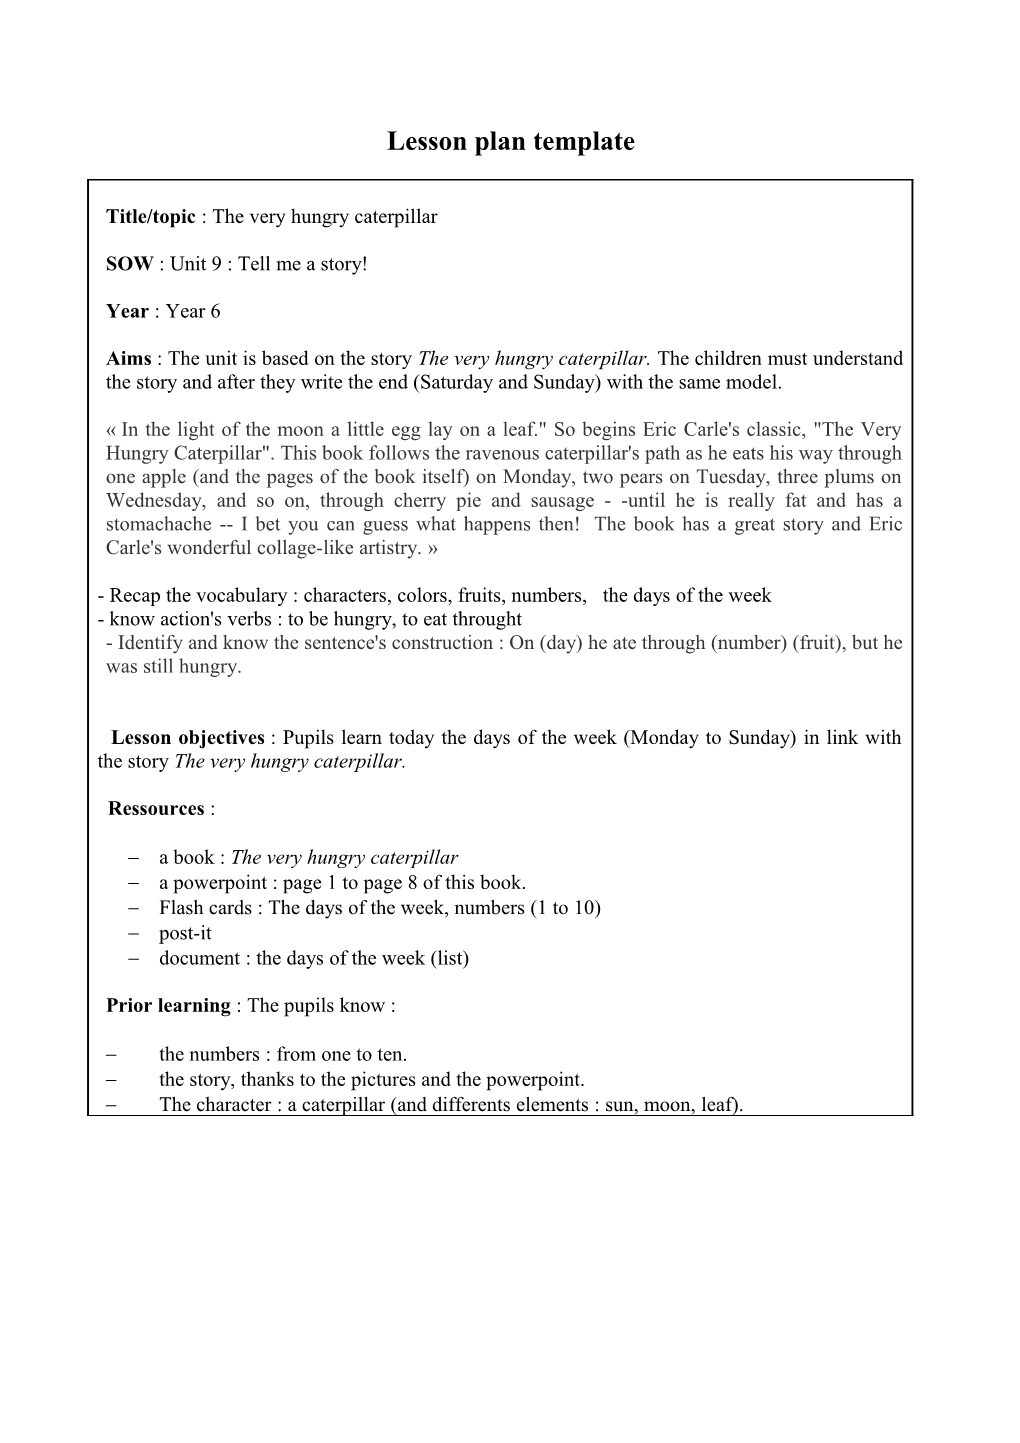 Lesson Plan Template s38